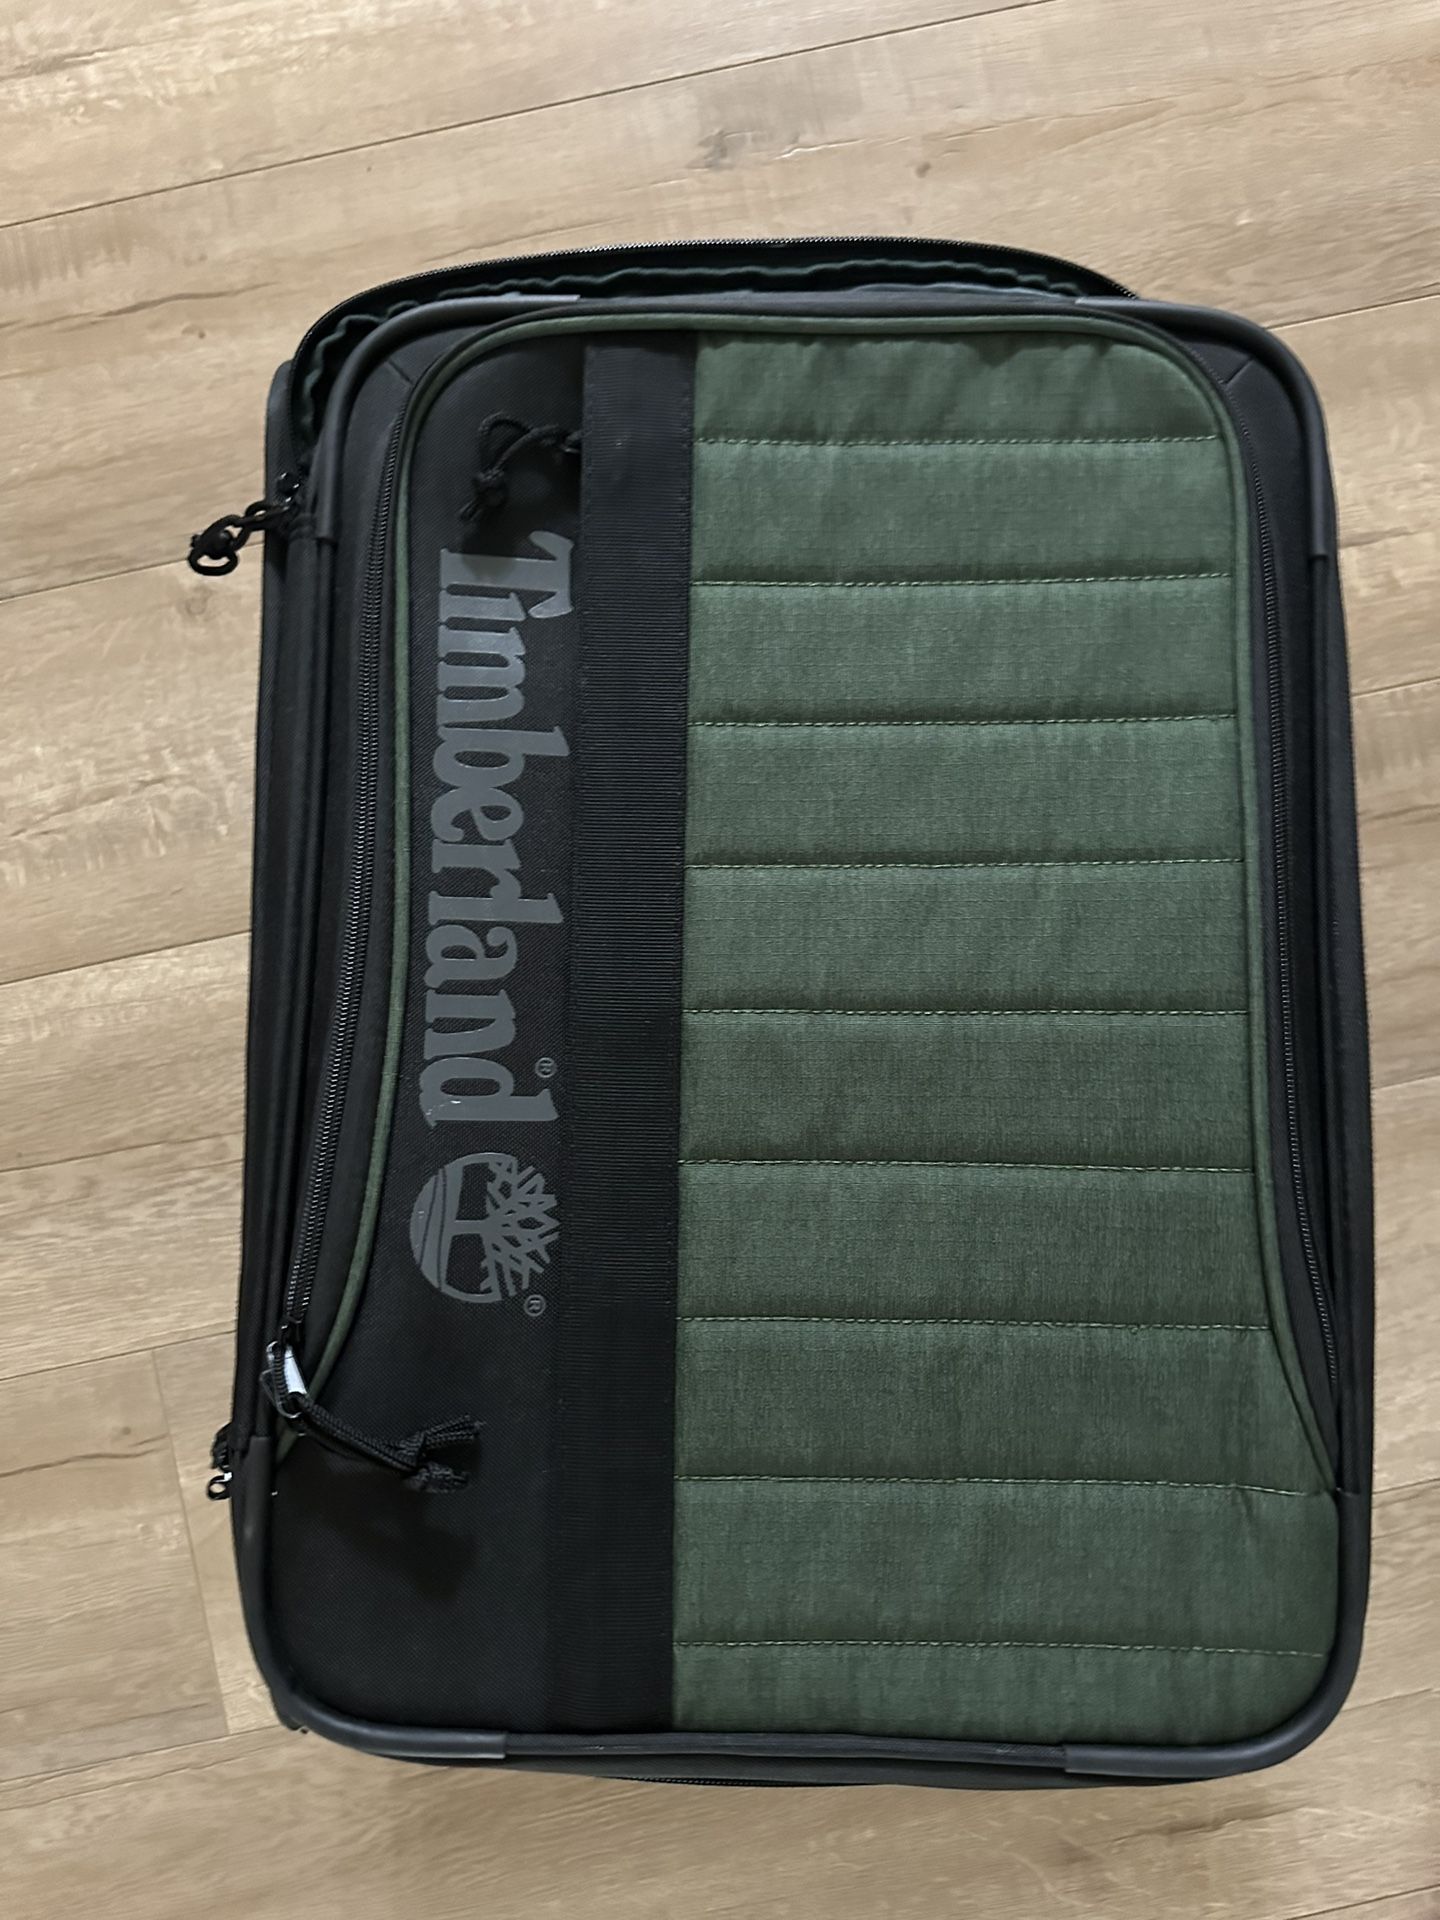 Timberland Carry on Luggage